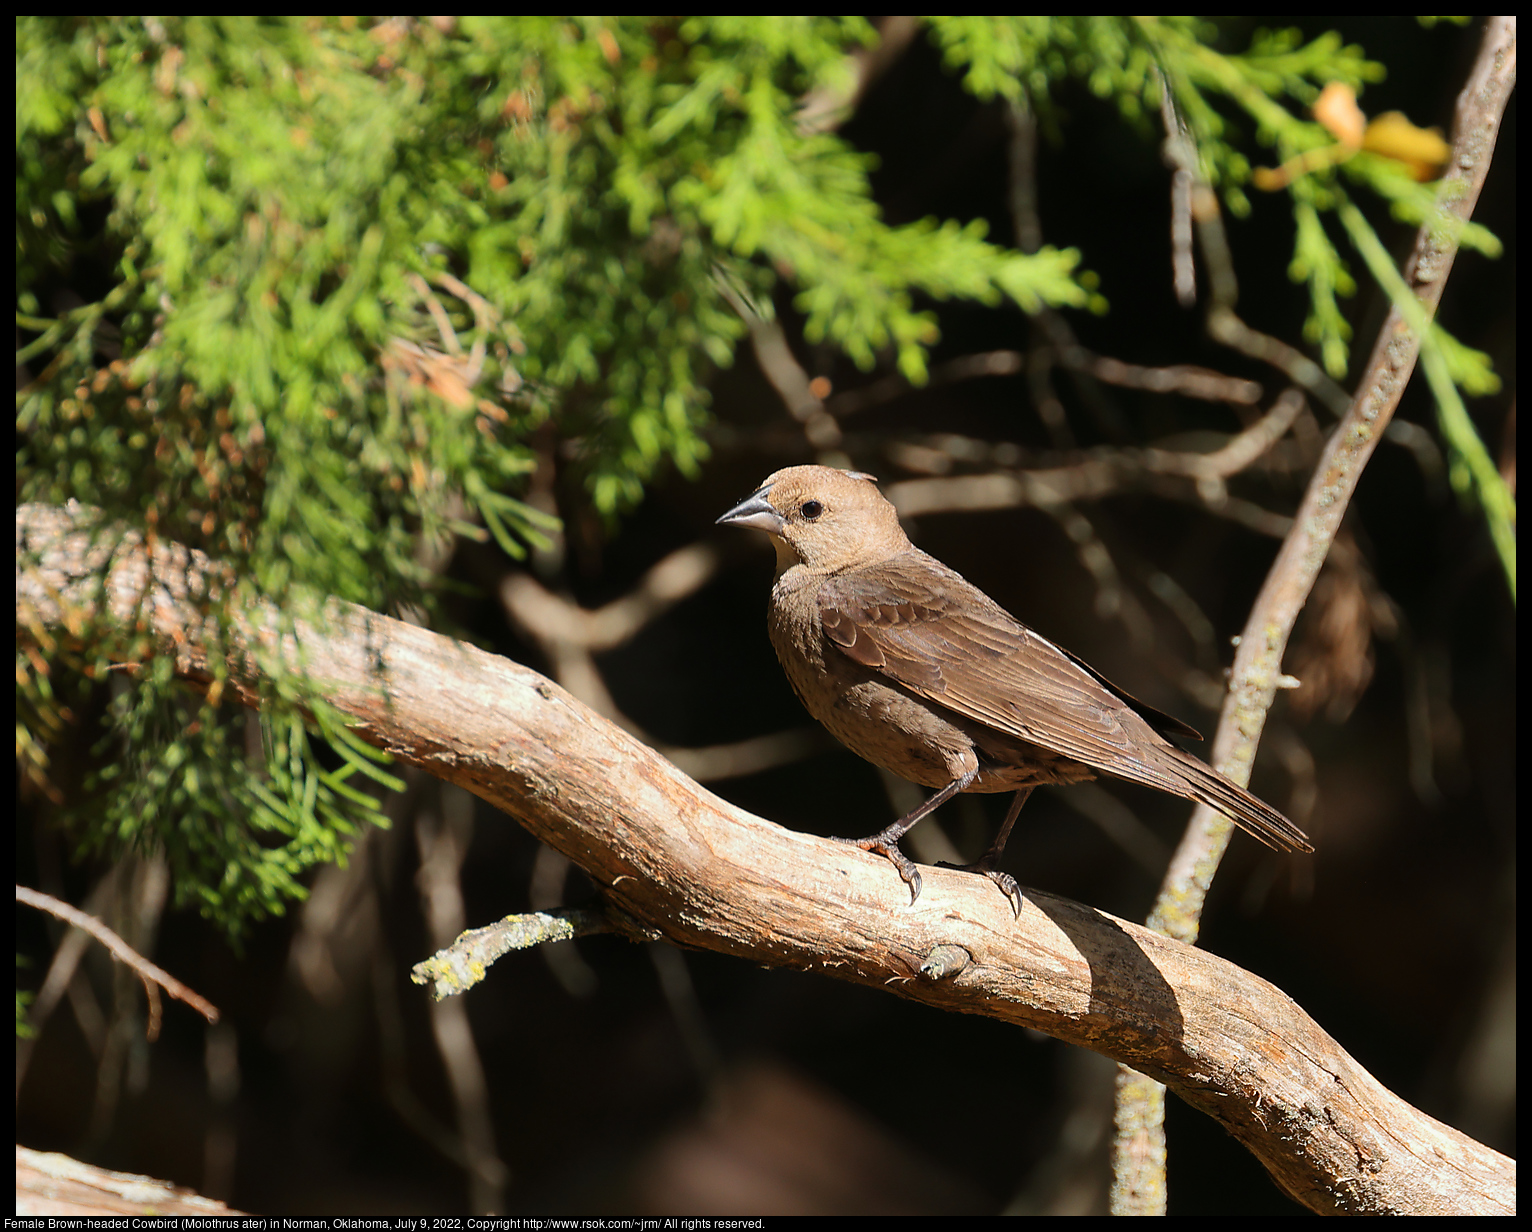 Female Brown-headed Cowbird (Molothrus ater) in Norman, Oklahoma, July 9, 2022